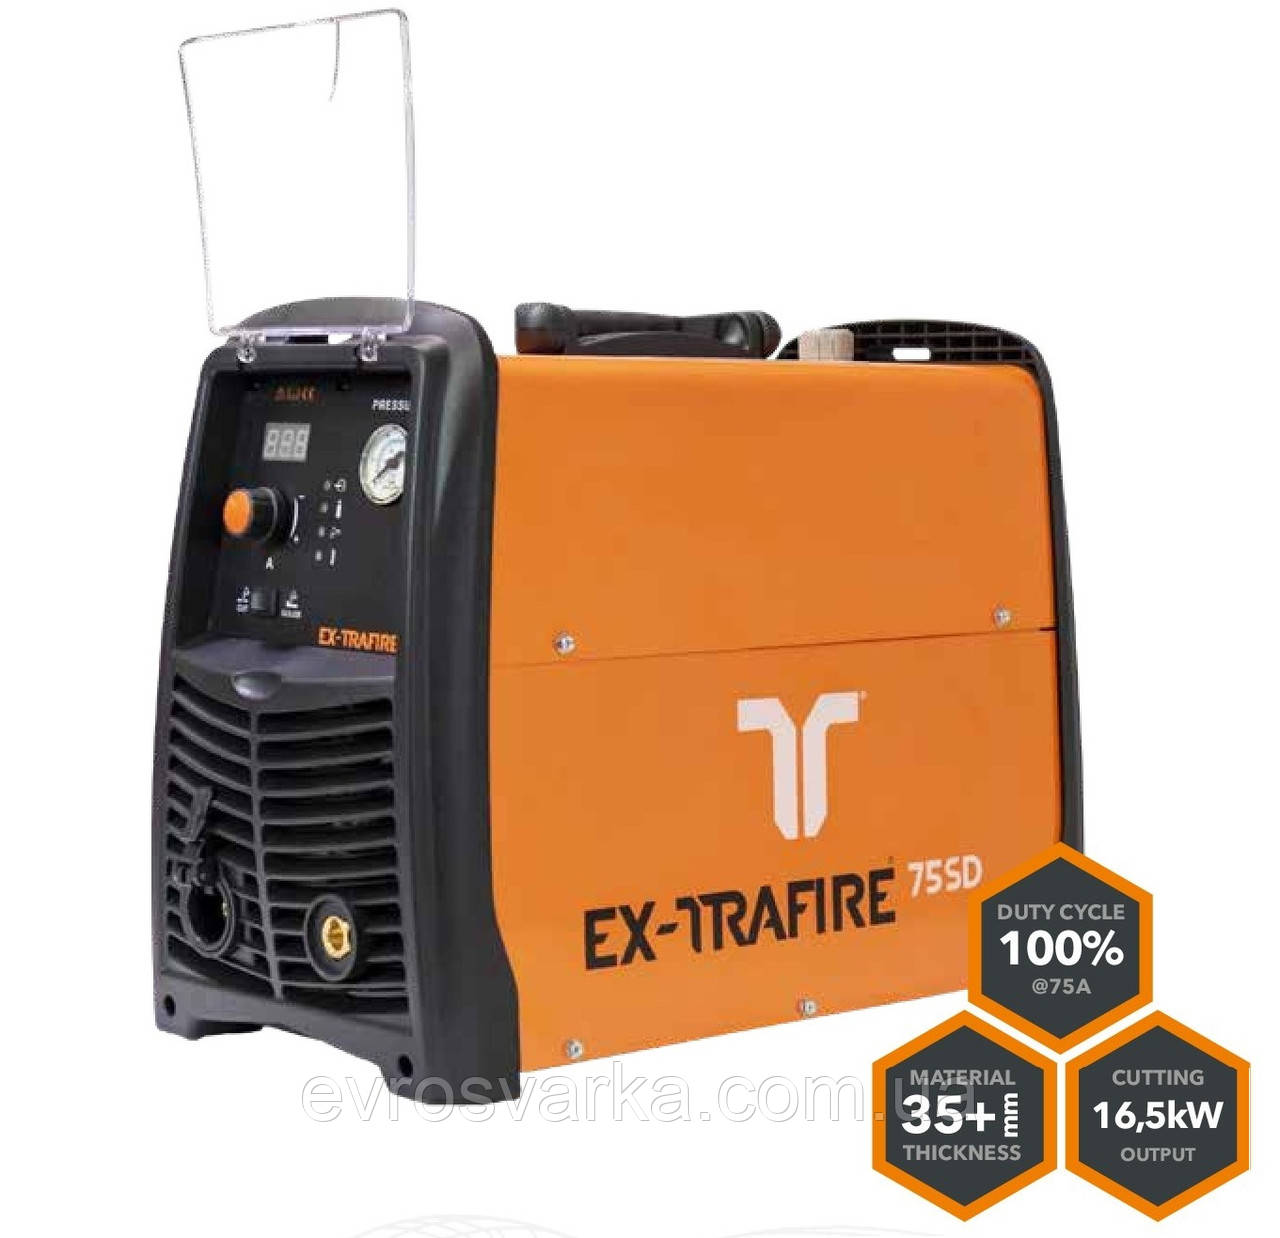 ПЛАЗМА THERMACUT EX-TRAFIRE 75SD